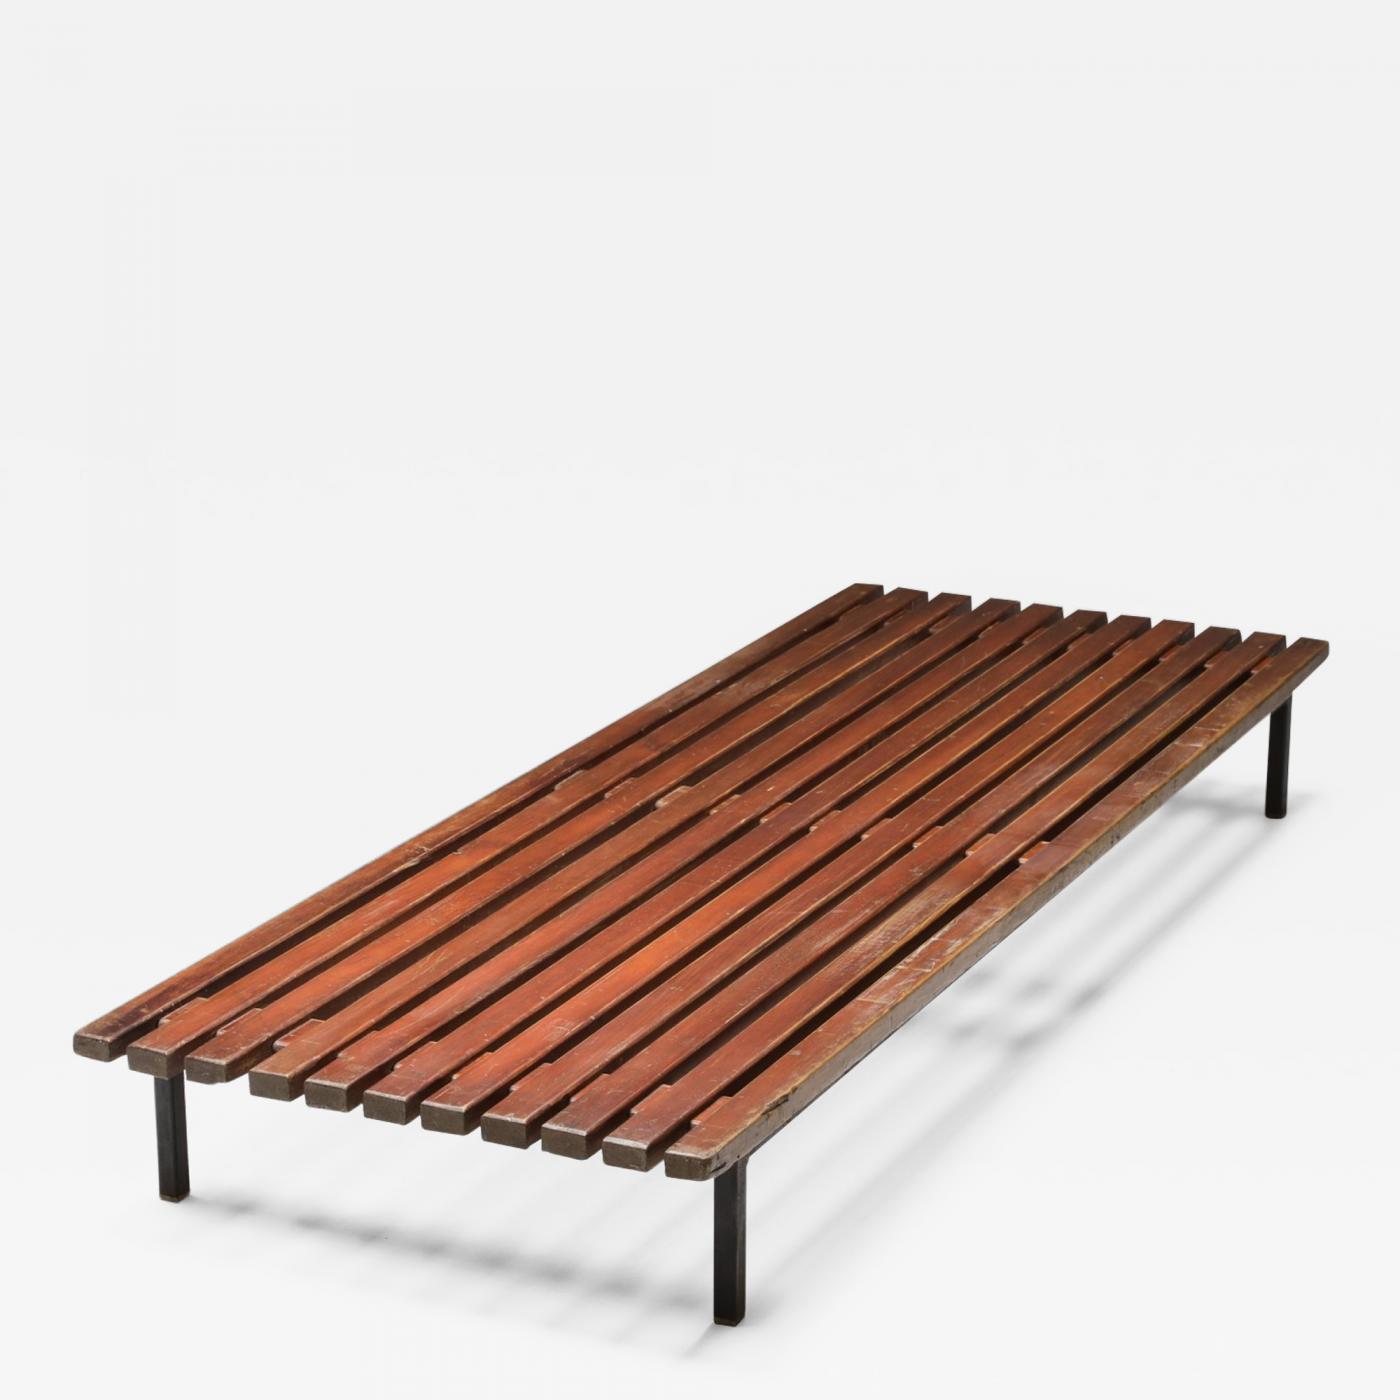 Charlotte Perriand - Charlotte Perriand 'Cansado' low bench - 1958